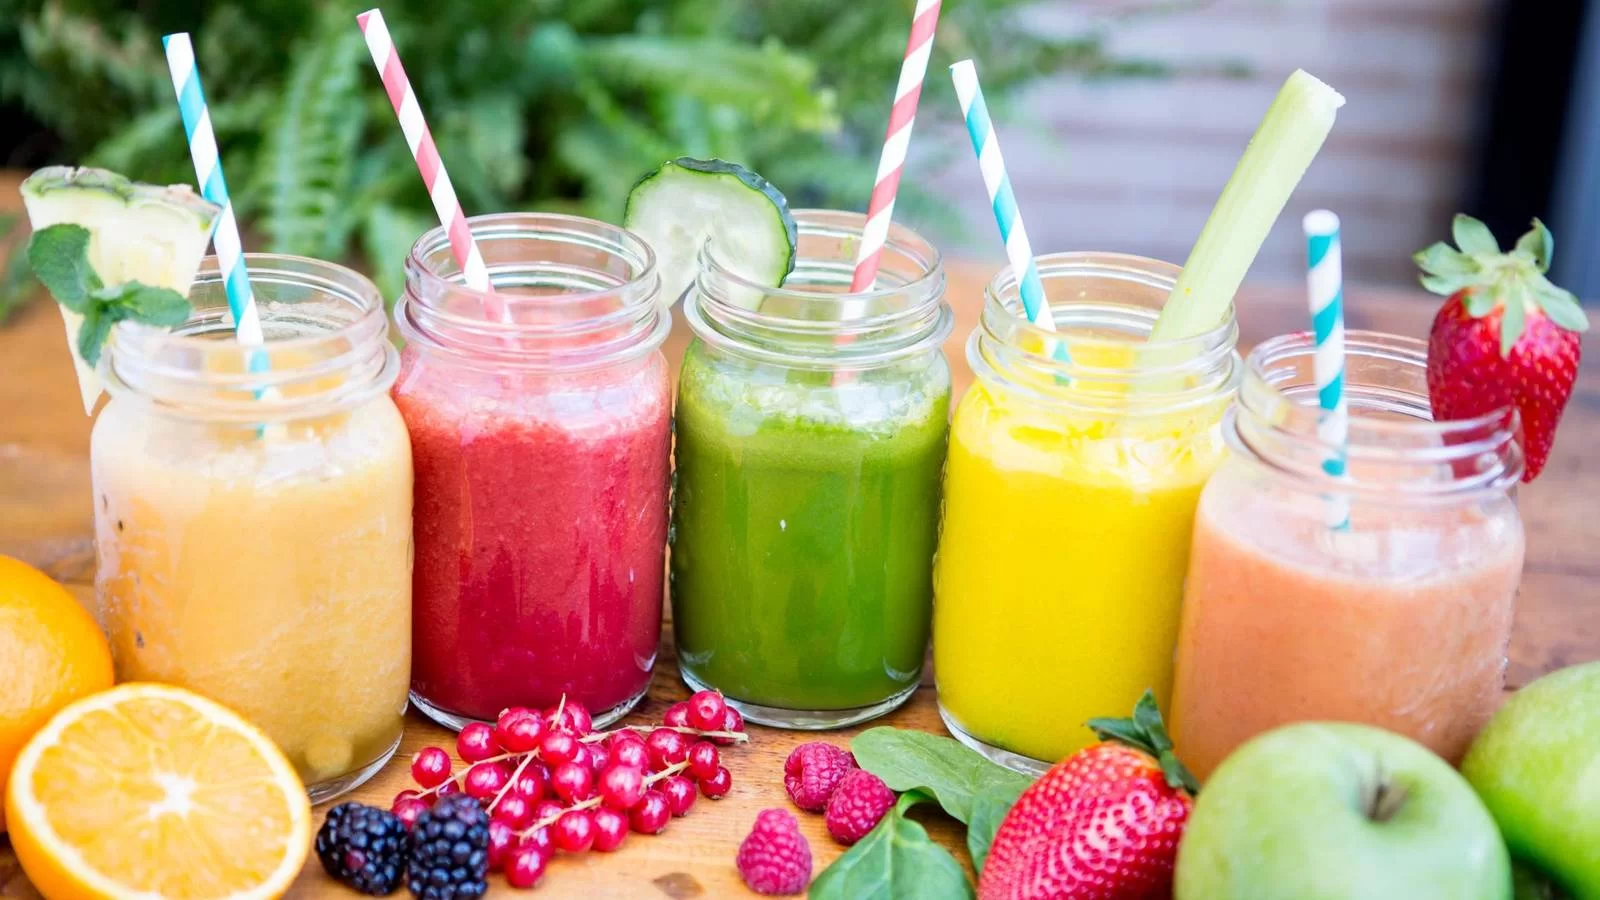 Integrating Green Smoothies In A 10-Day Detox Program